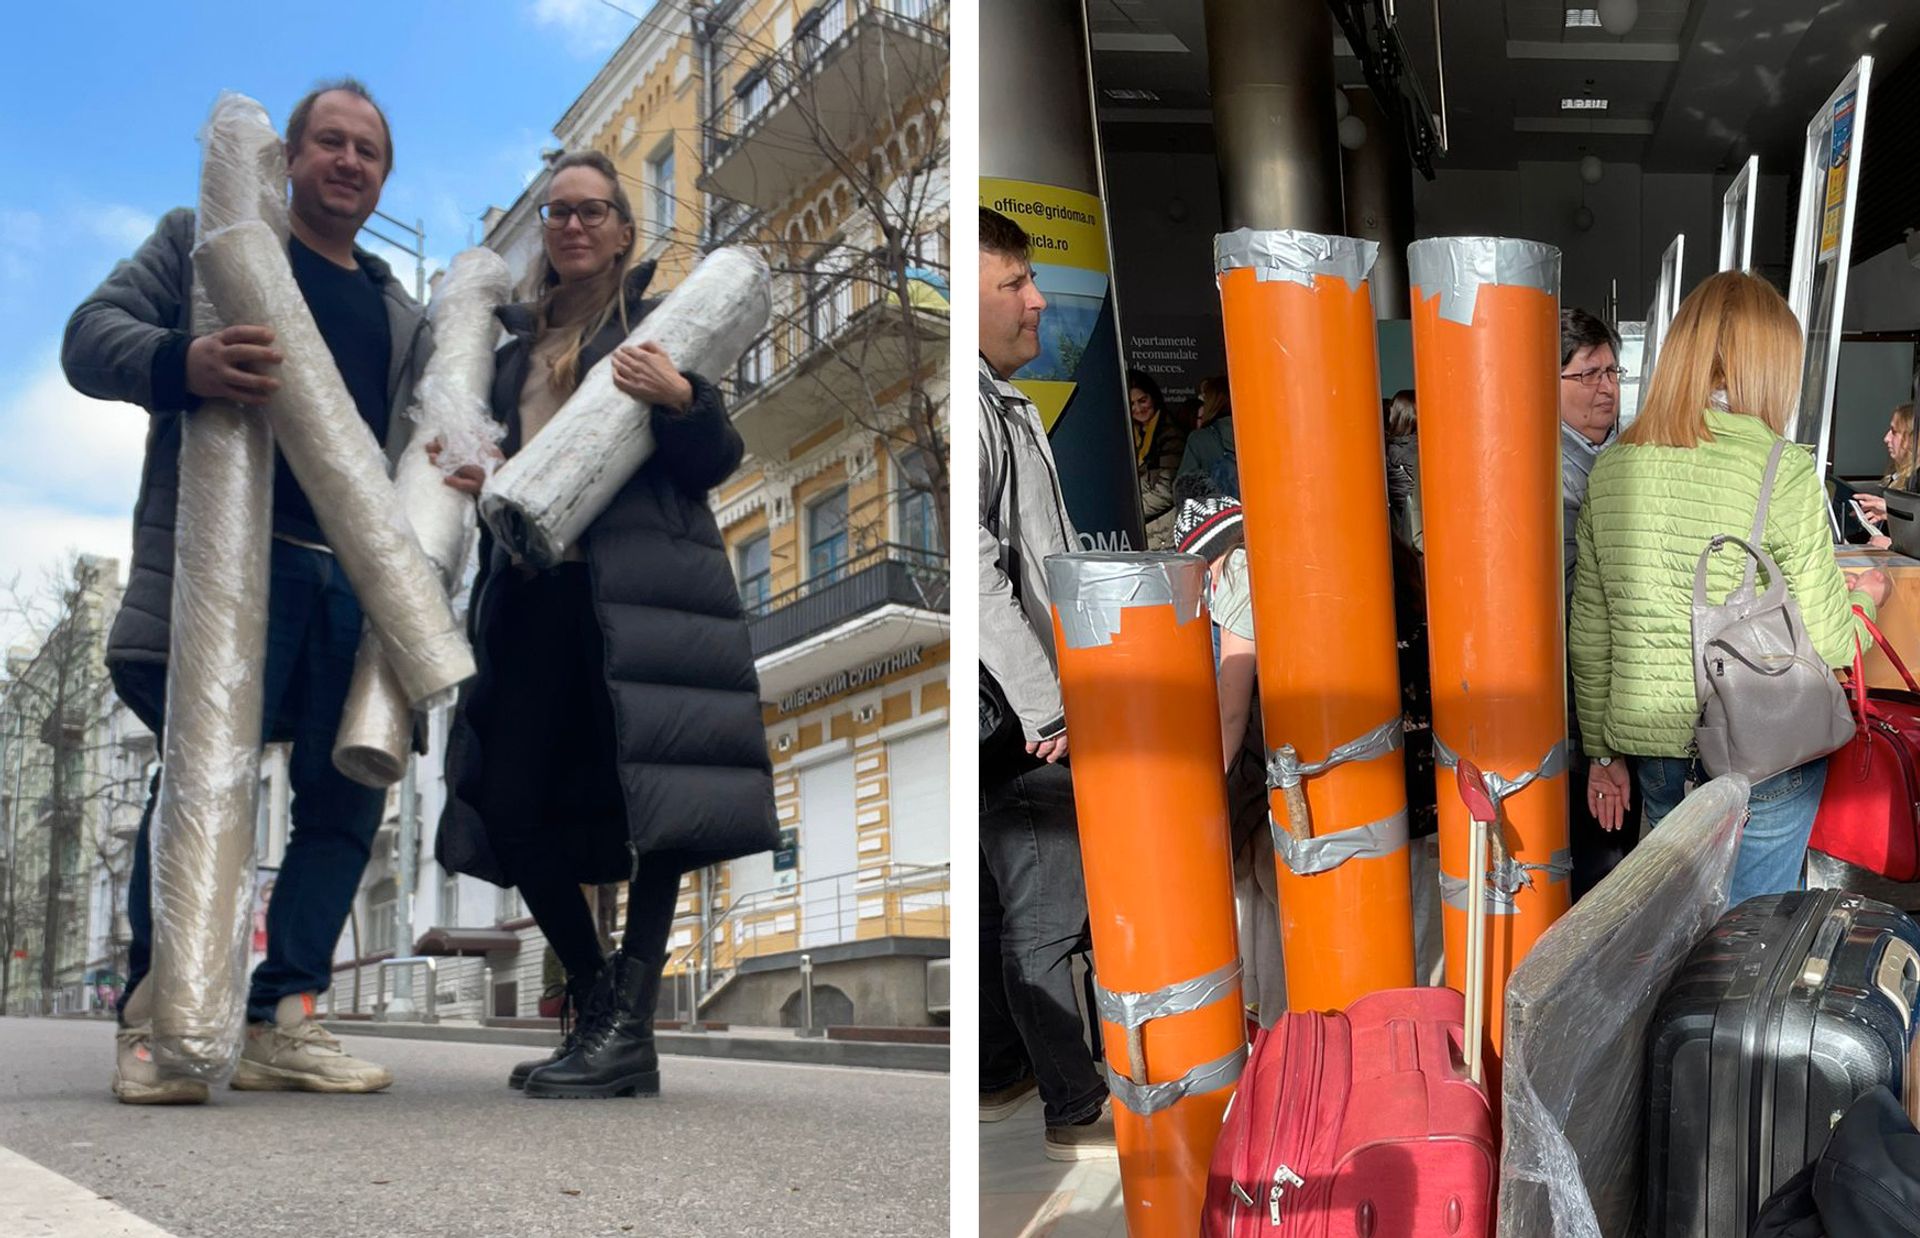 Katia Vozianova and Oleksandr Shchelushchenko, founder of Tsekh contemporary art gallery in Kyiv, hid paintings in drainpipes to save them from the war. Photos courtesy of Tsekh contemporary art gallery in Kyiv